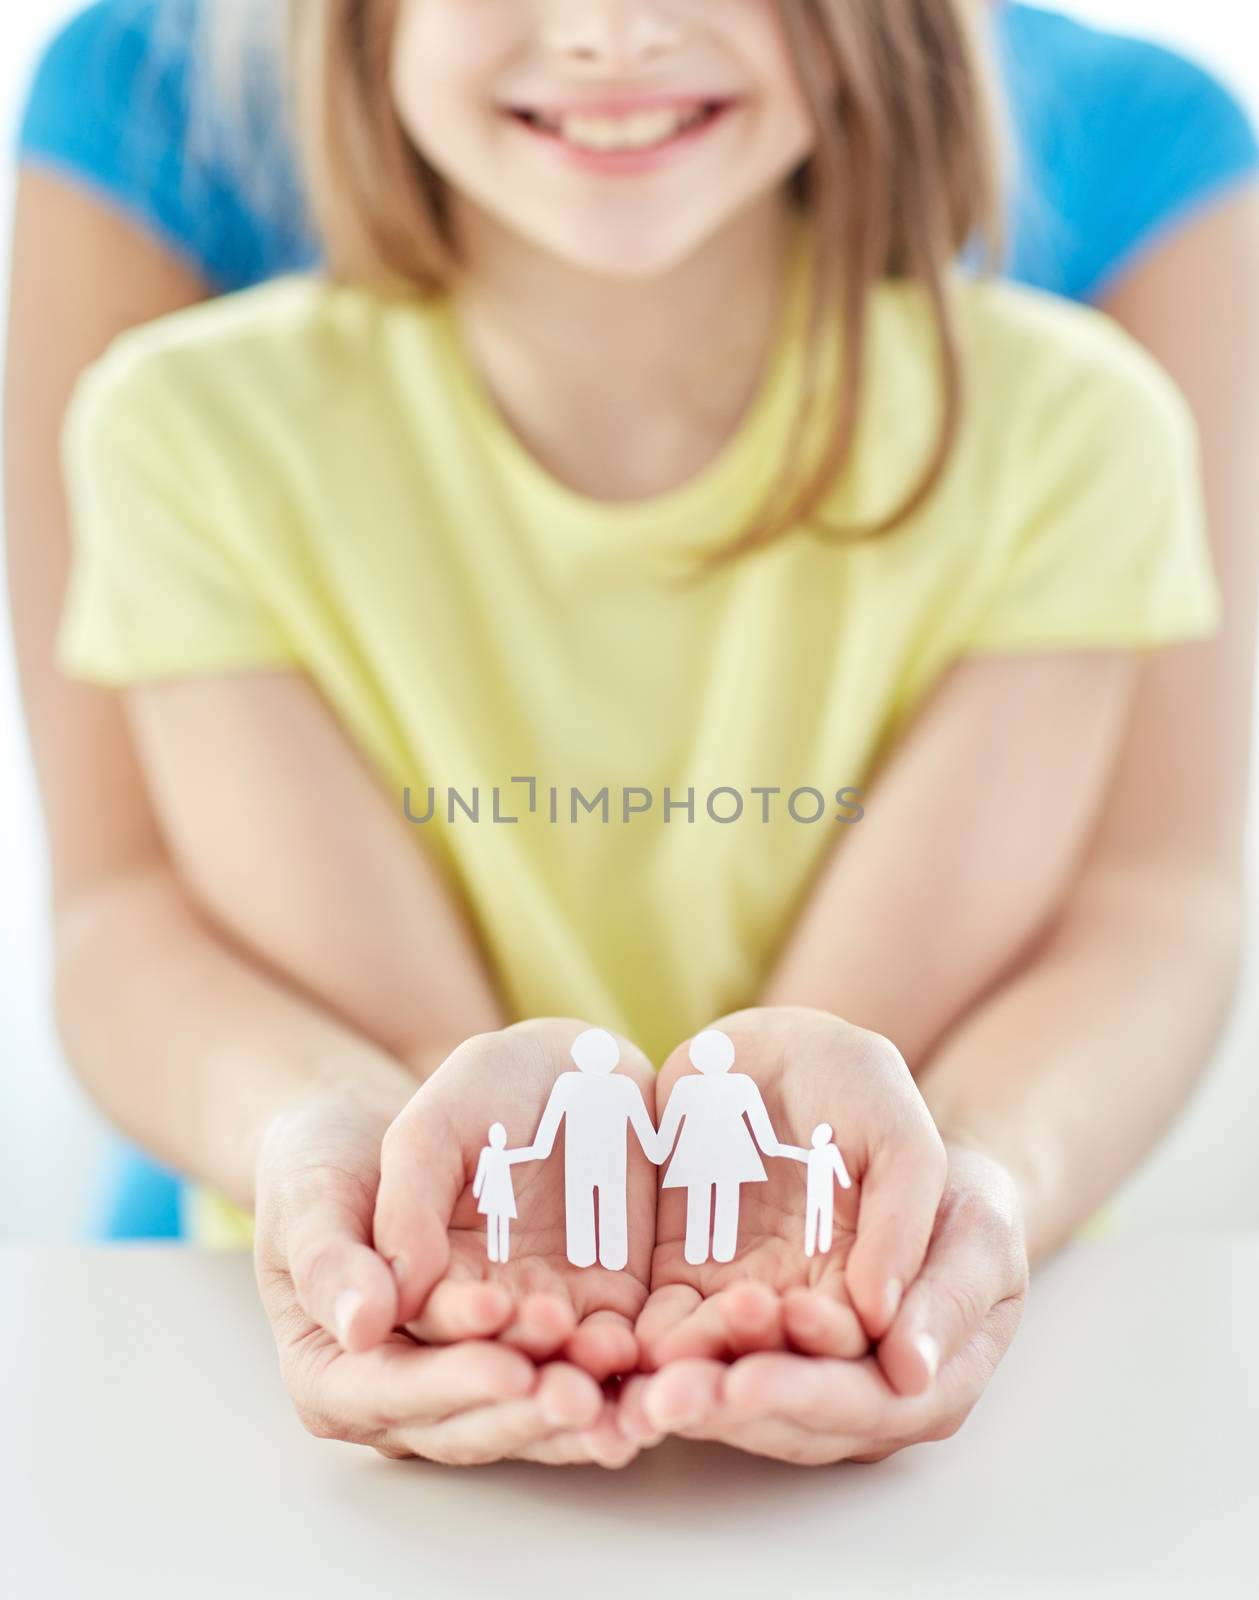 people, charity, family and care concept - close up of woman and girl hands holding paper family cutout